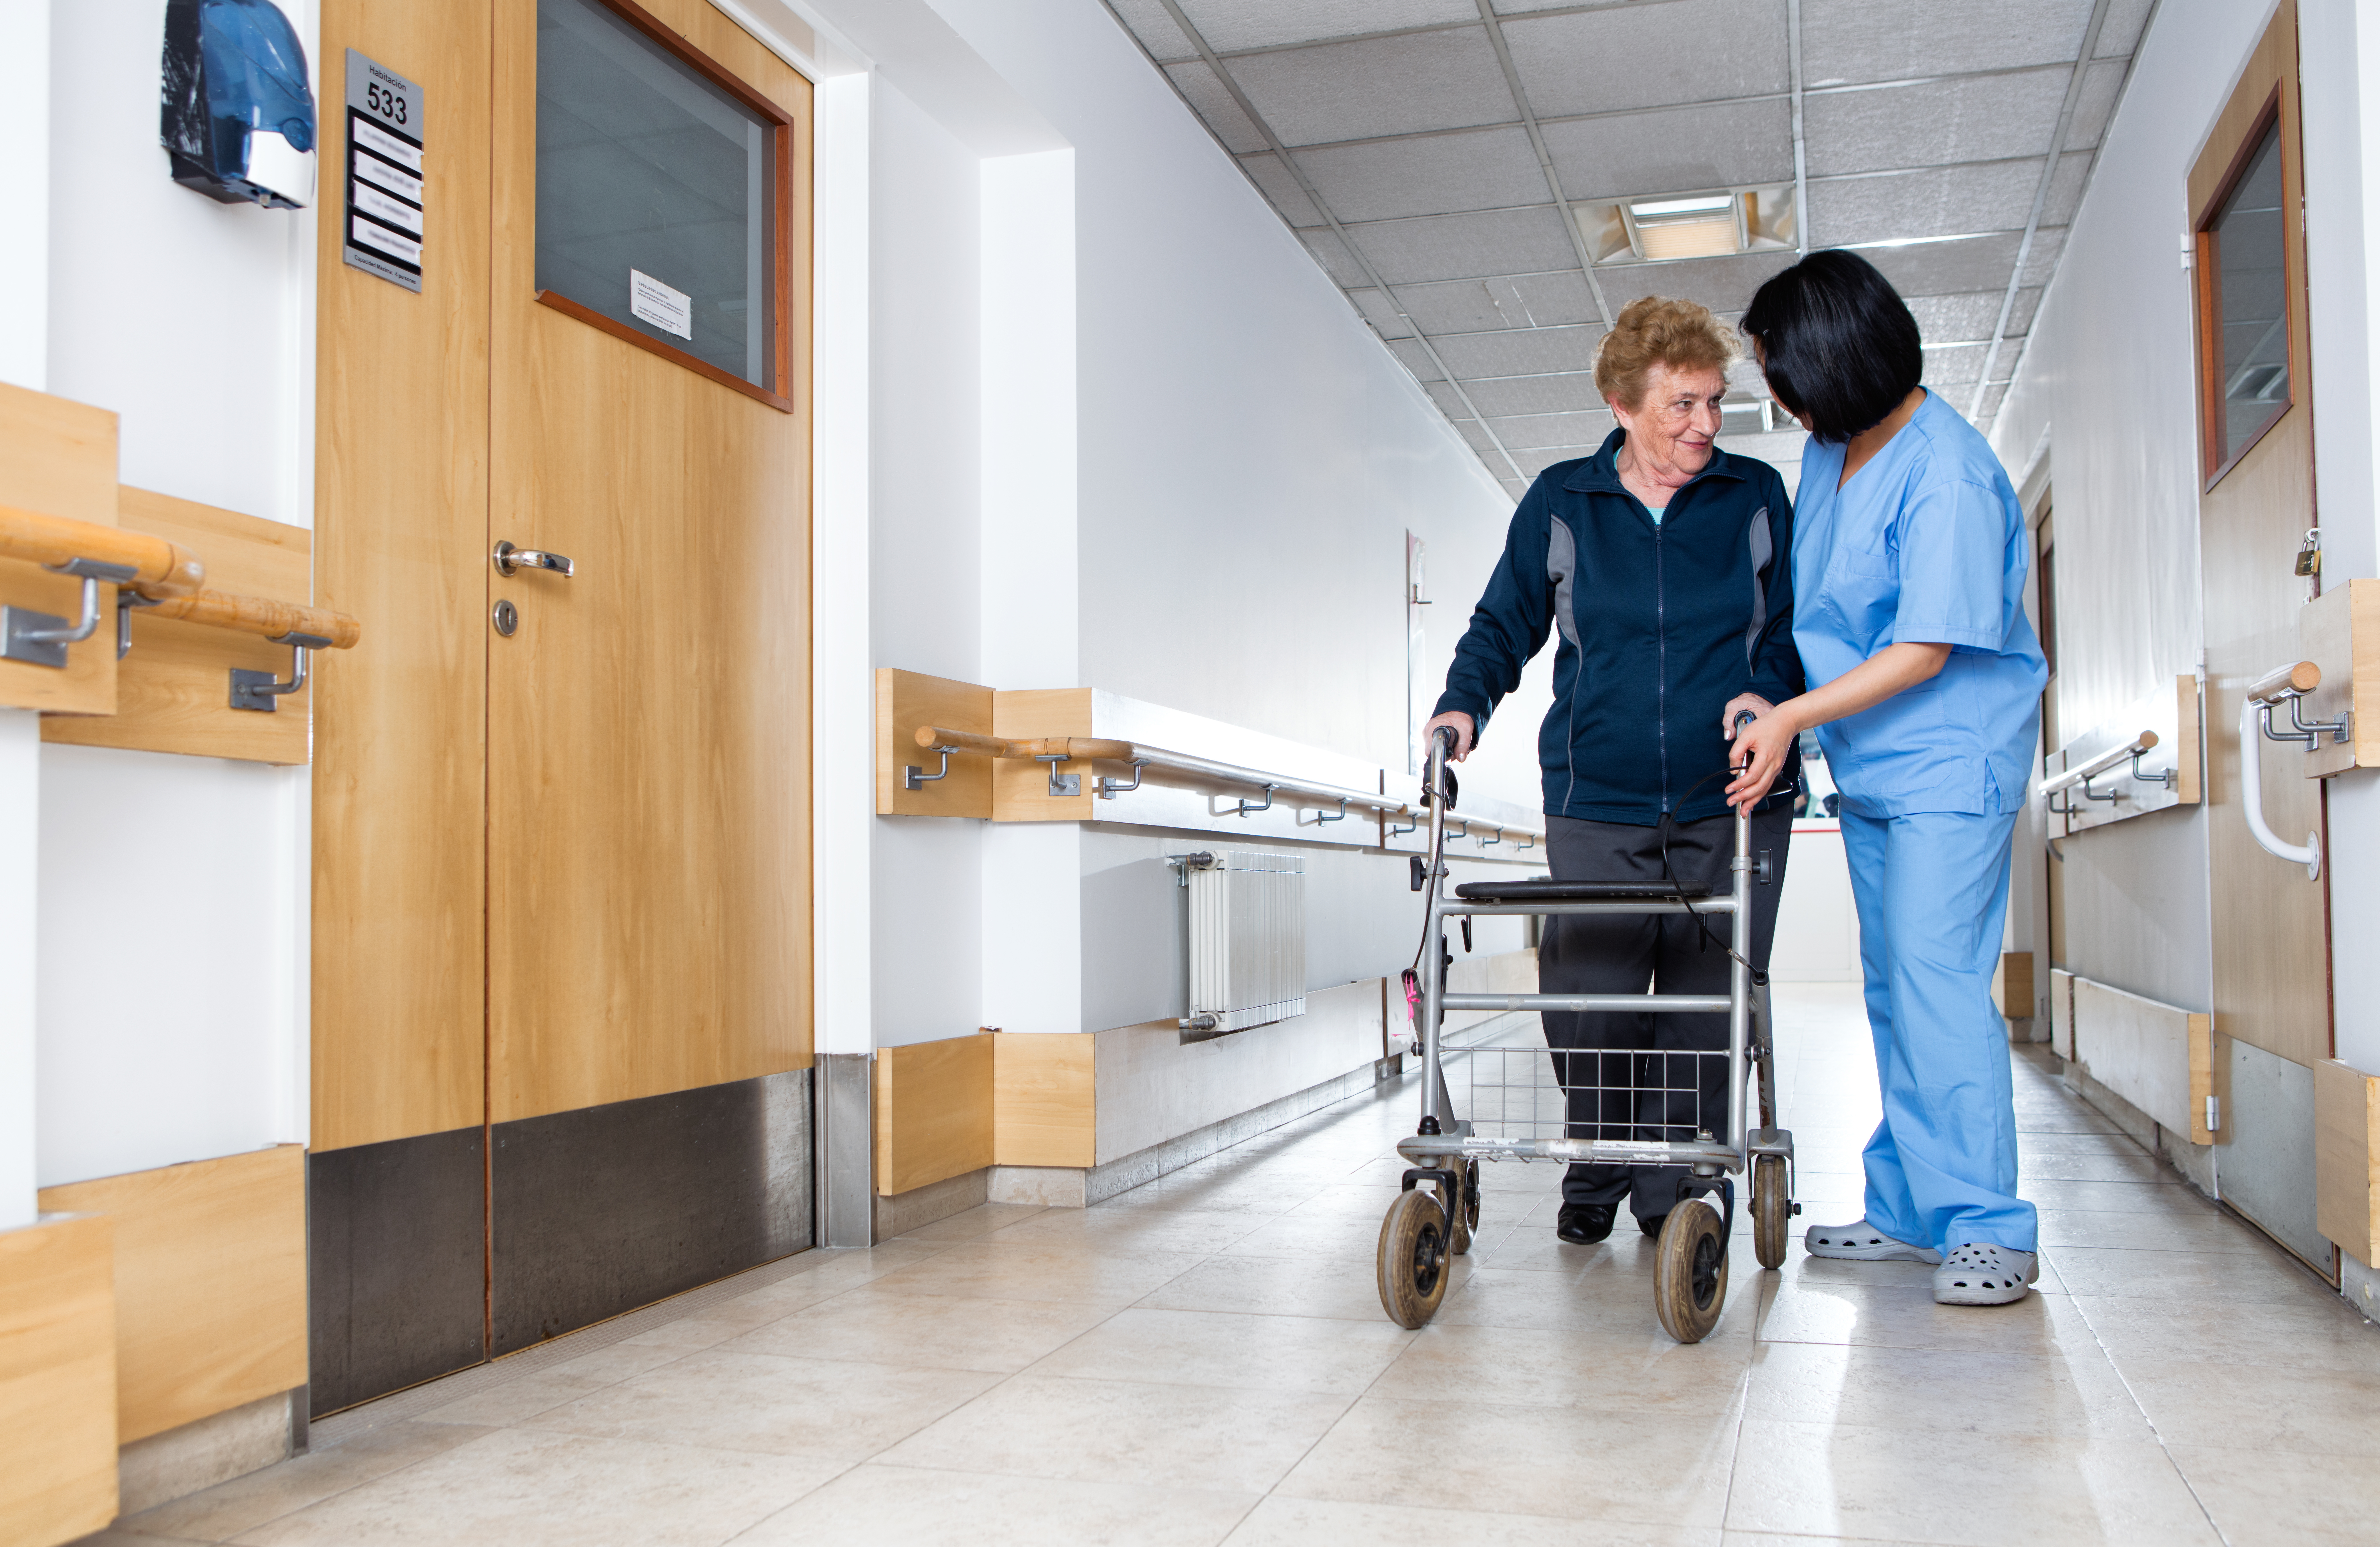 A caretaker and patient at a nursing facility. Shutterstock image via user GagliardiImages